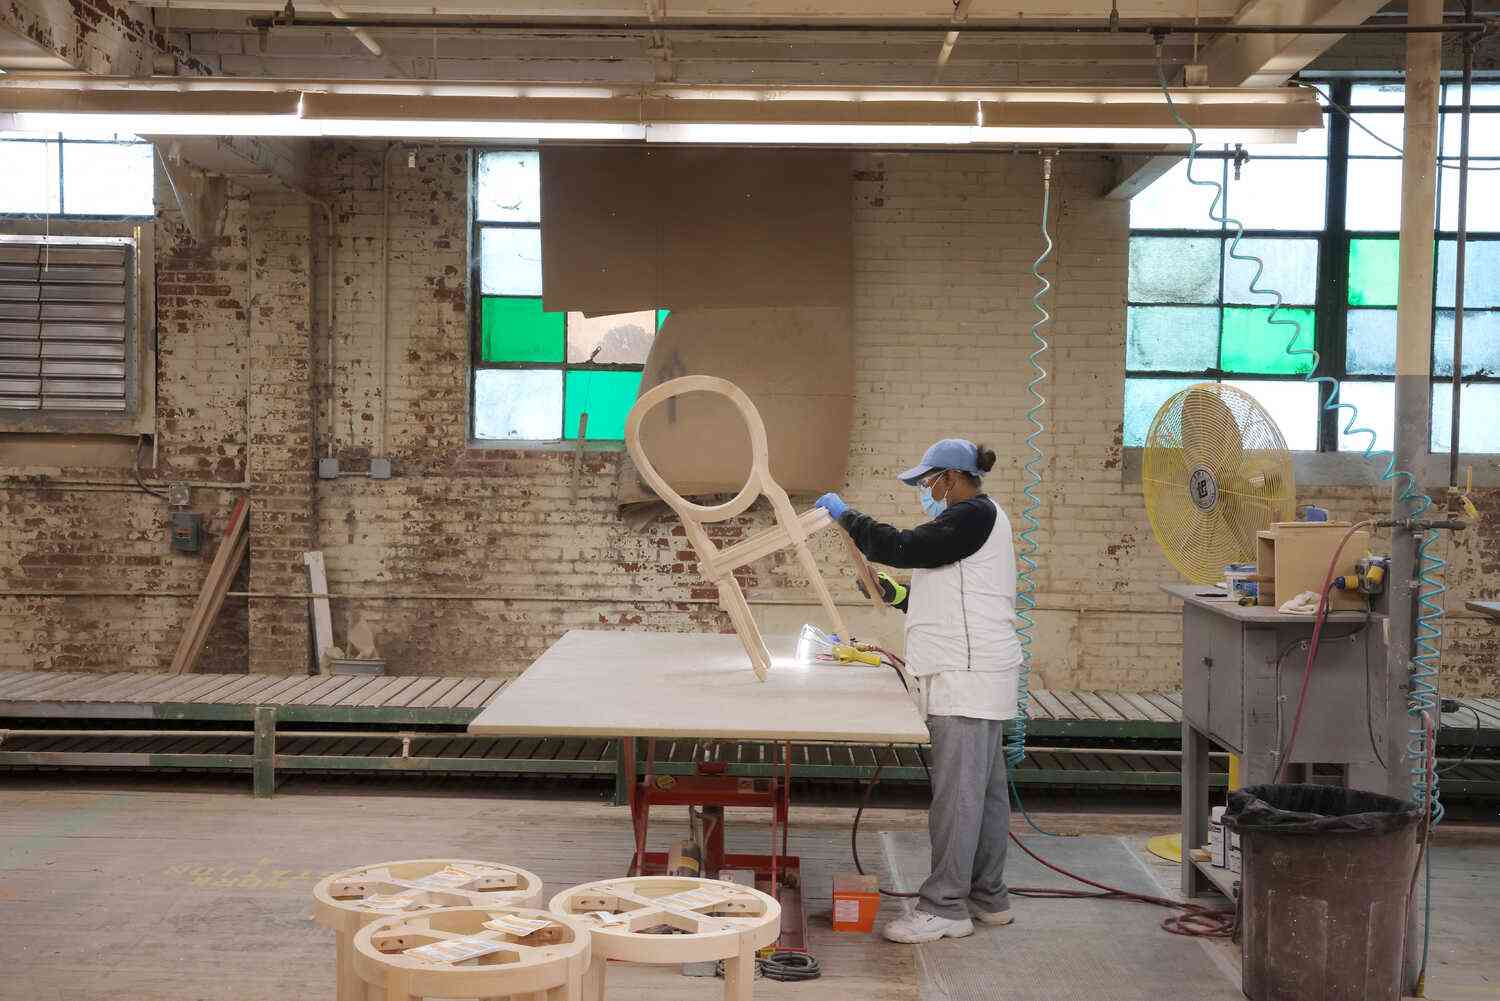 A Furniture-Maker Relies on Secondhand Goods